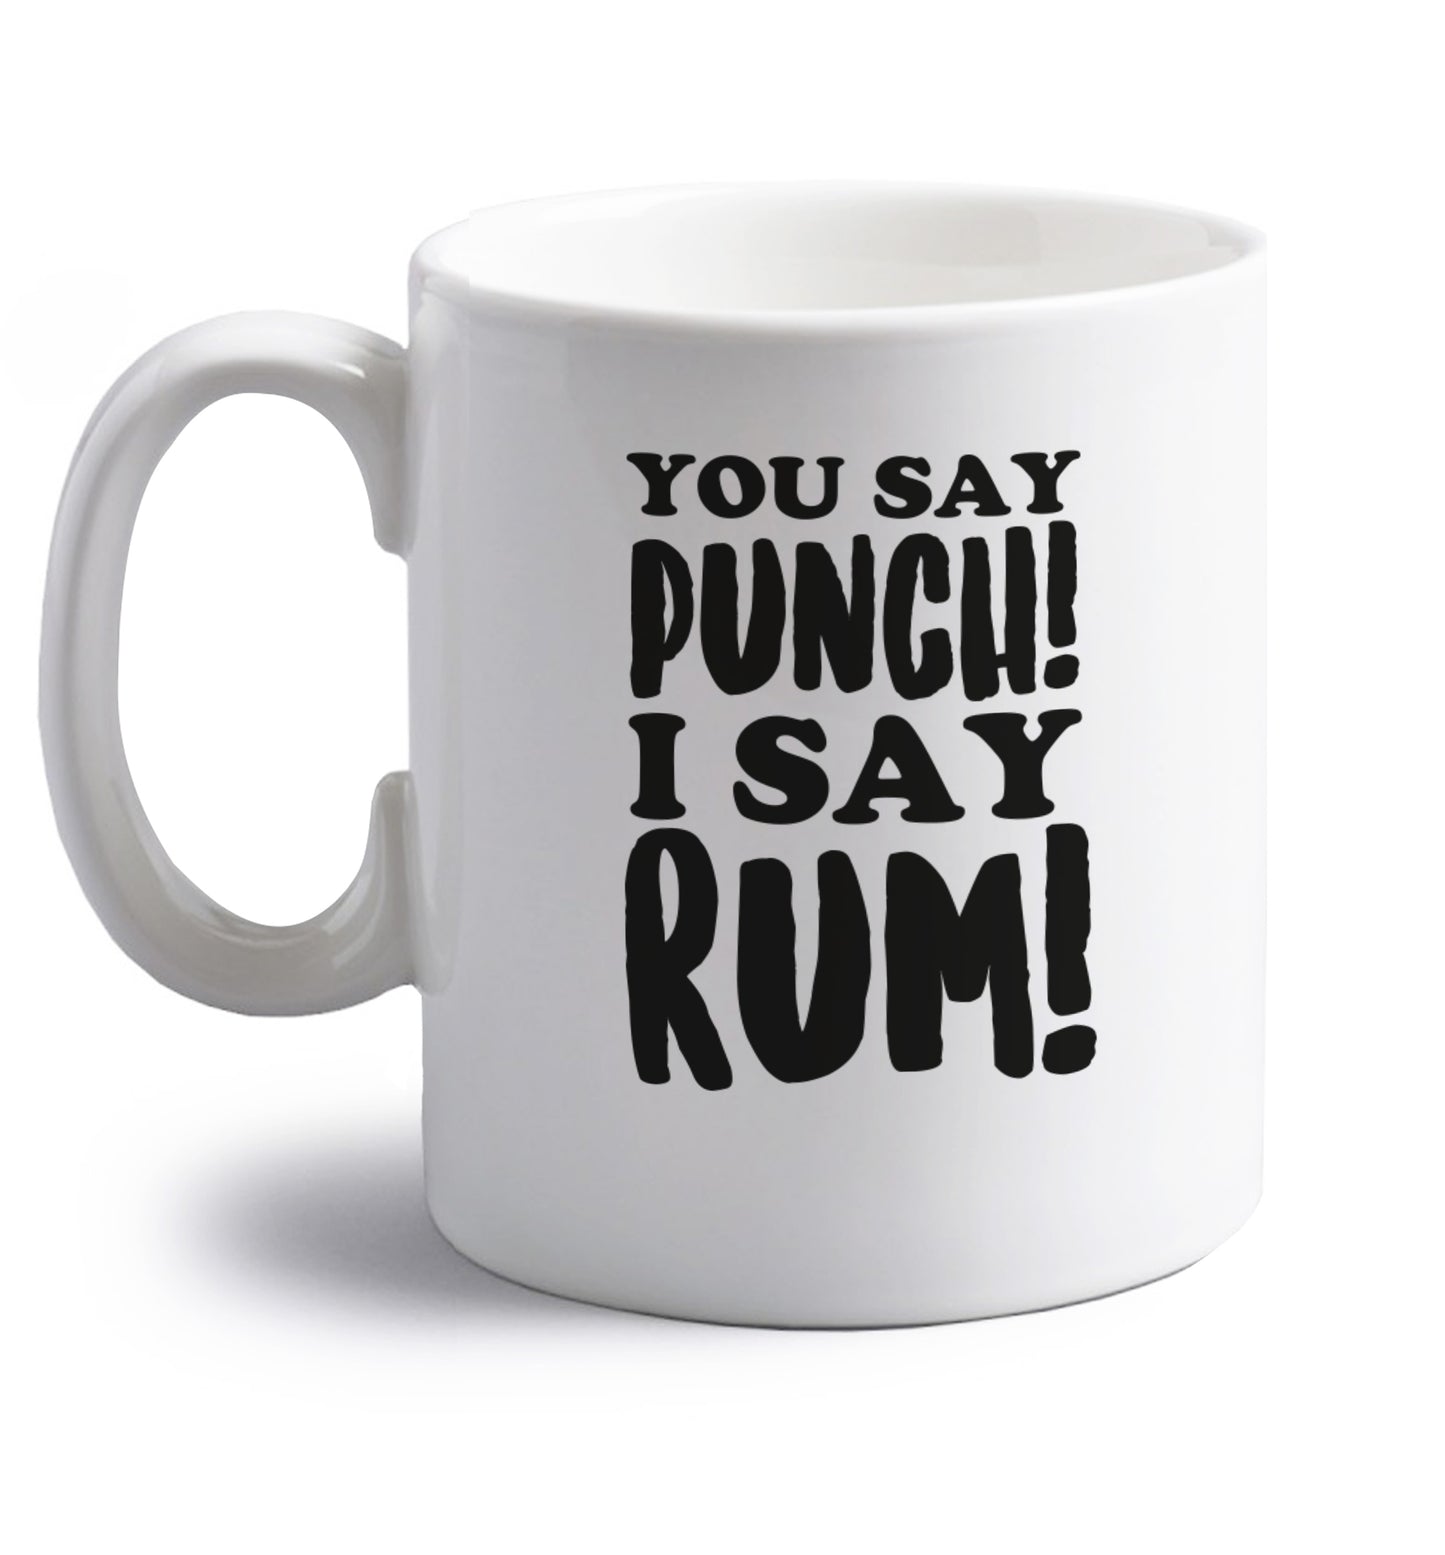 You say punch I say rum! right handed white ceramic mug 